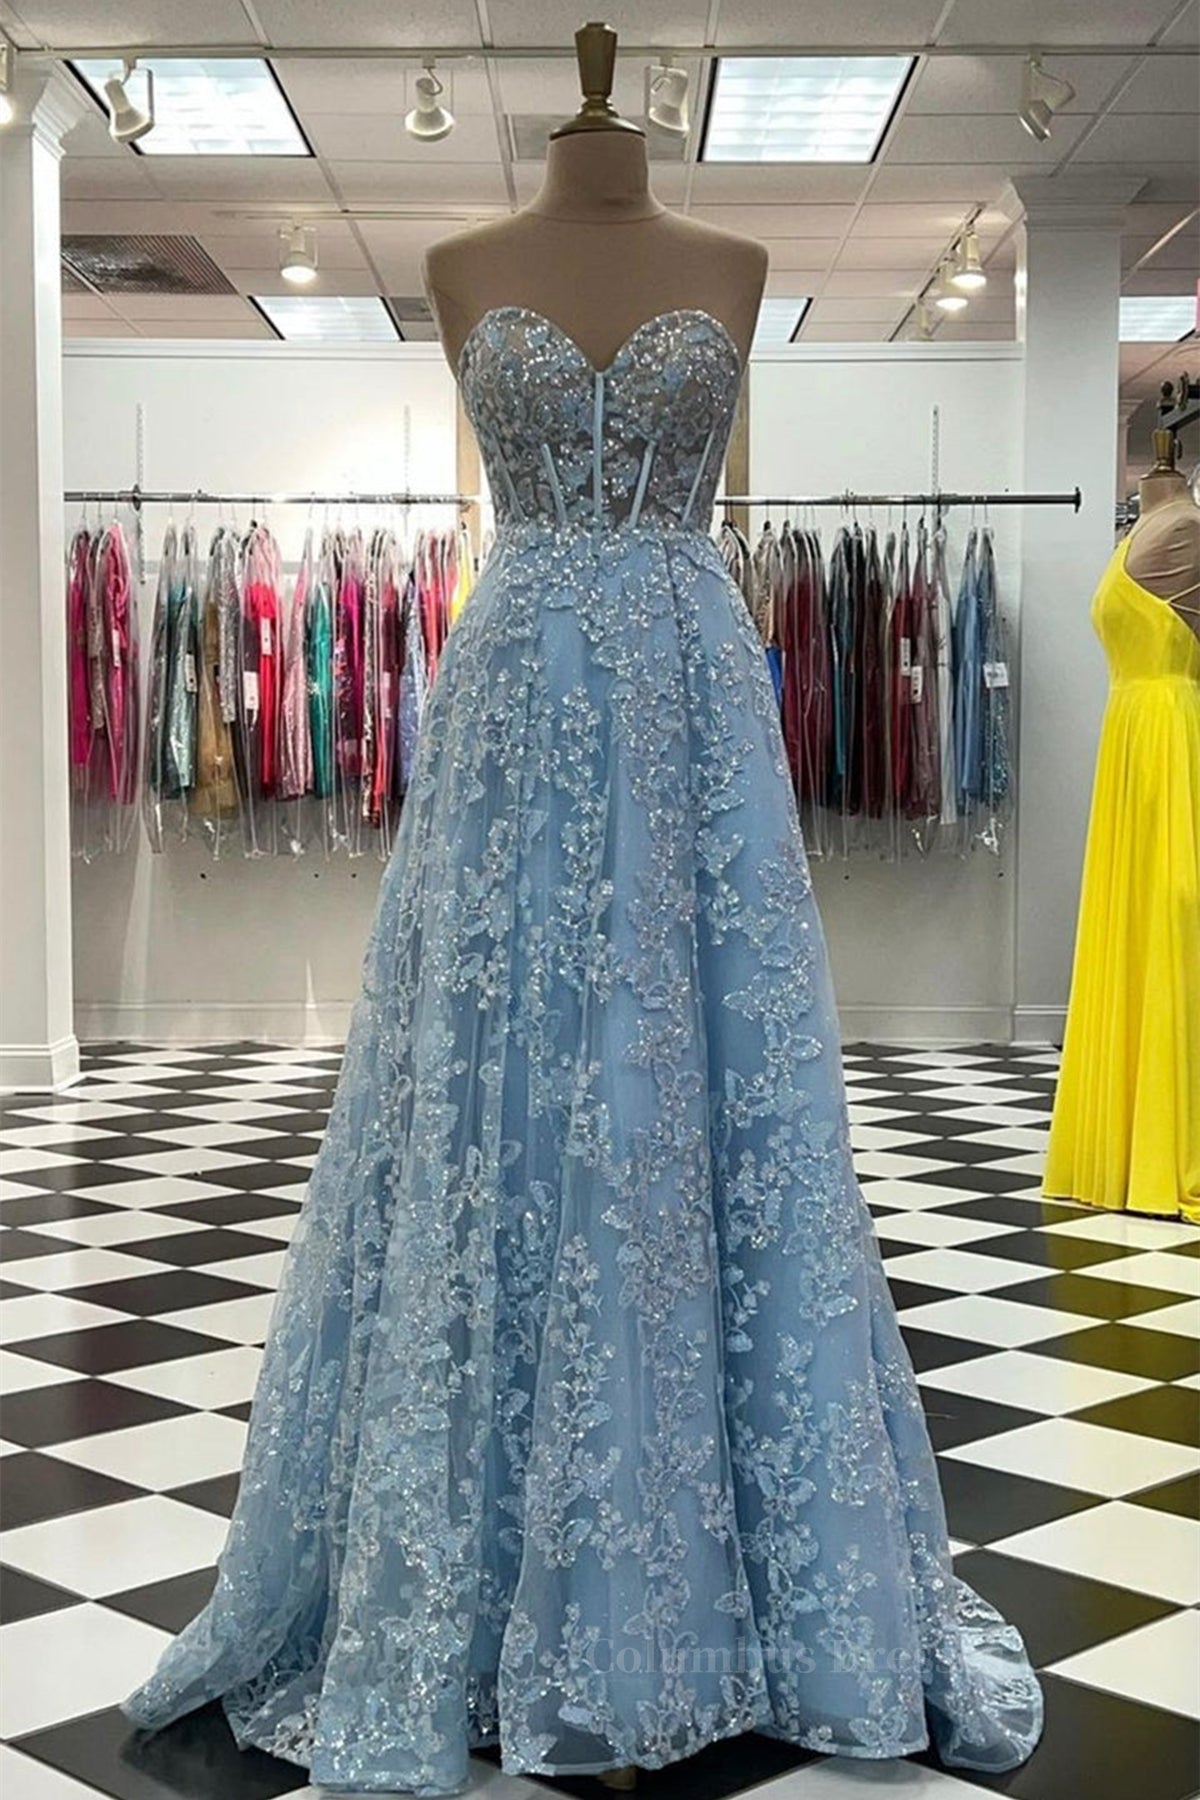 Classy Prom Dress, Sweetheart Neck Blue Lace Appliques Long Prom Dress with Long Sleeves, Blue Lace Floral Formal Graduation Evening Dress